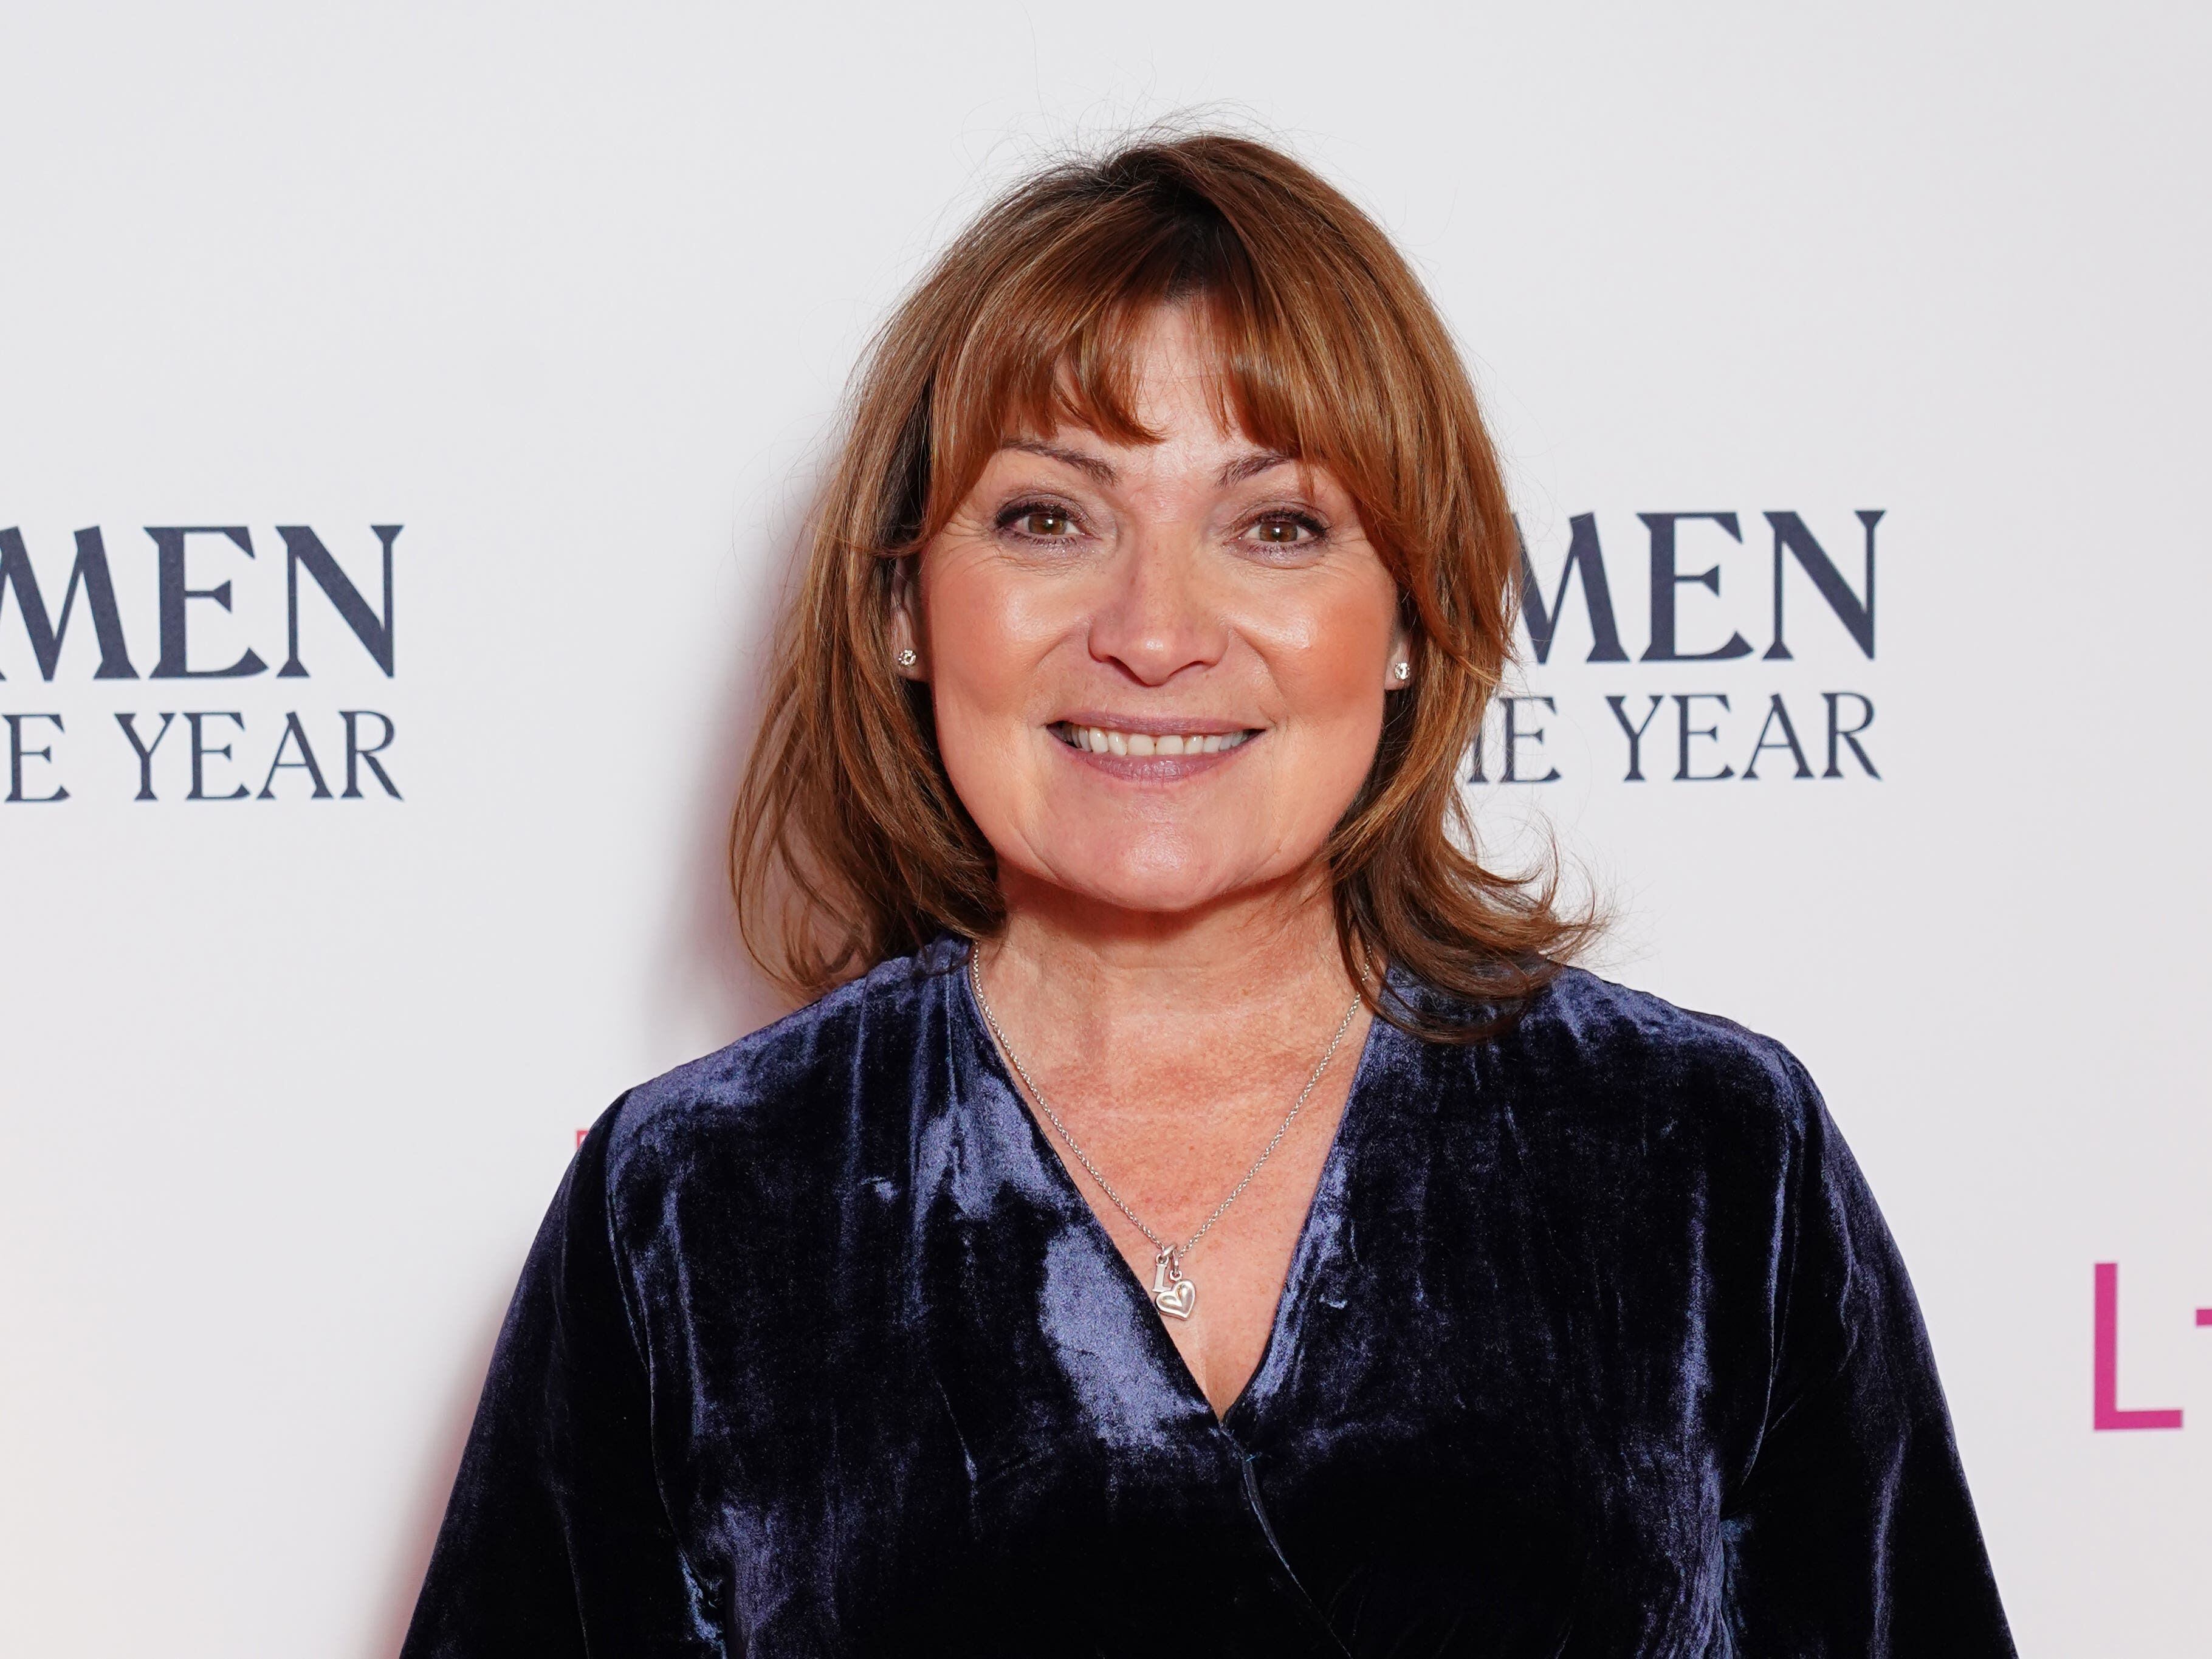 TV presenter Lorraine Kelly unveiled as Owl on The Masked Singer